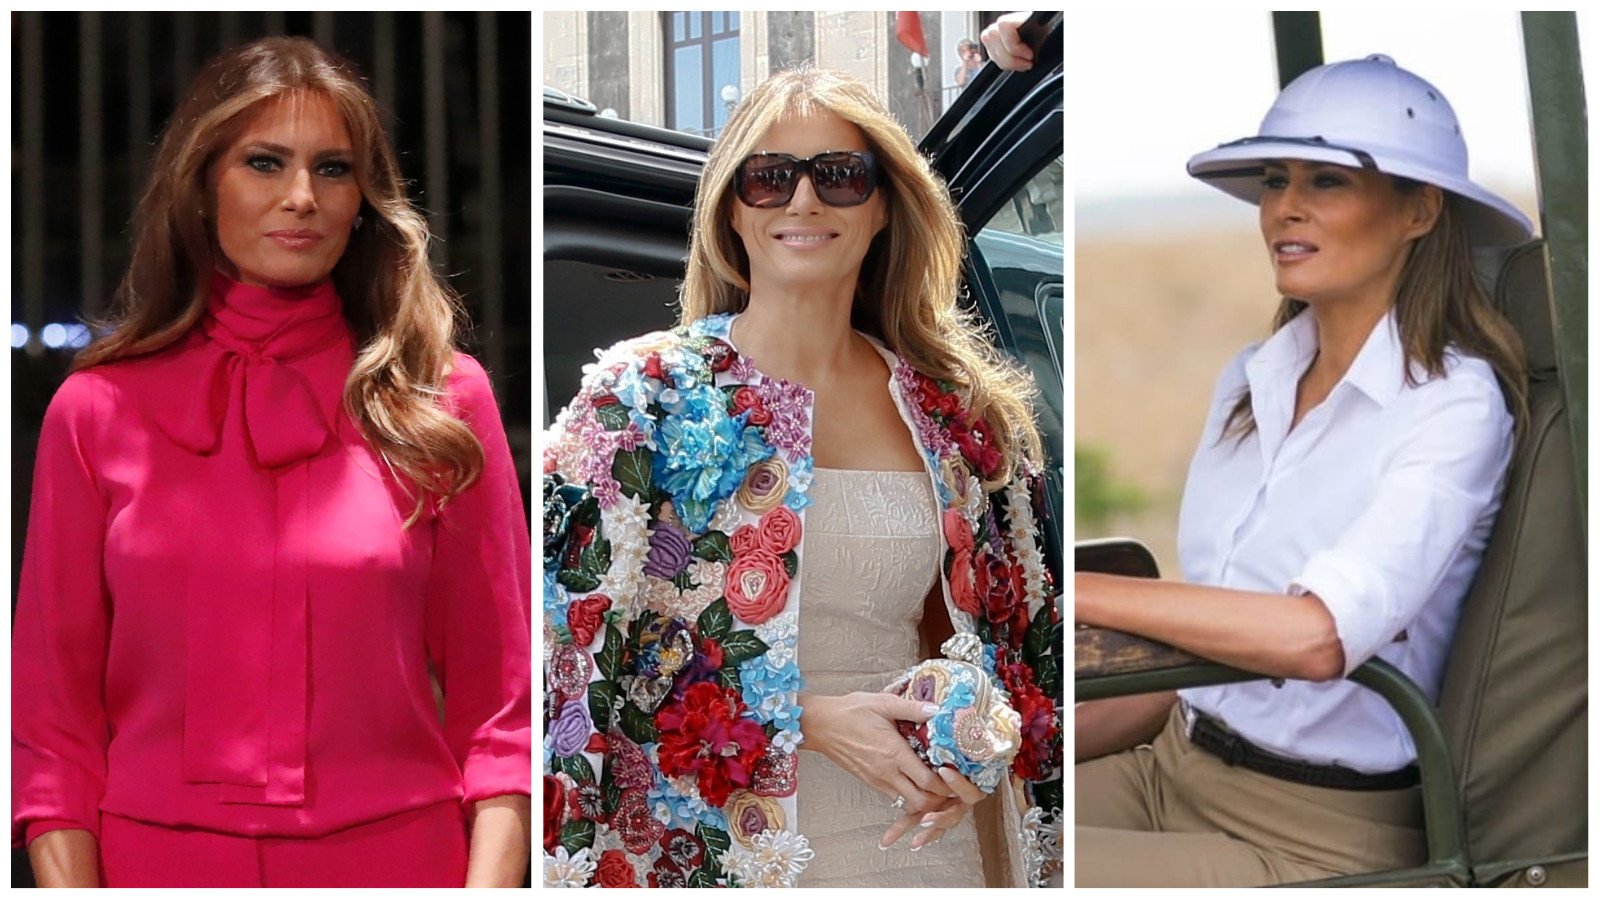 While she may not be a fashionista, Melania Trump has worn some fashion items that have been jaw dropping, but not for the right reasons. Photos: AFP, AP, @kwskenya/Twitter